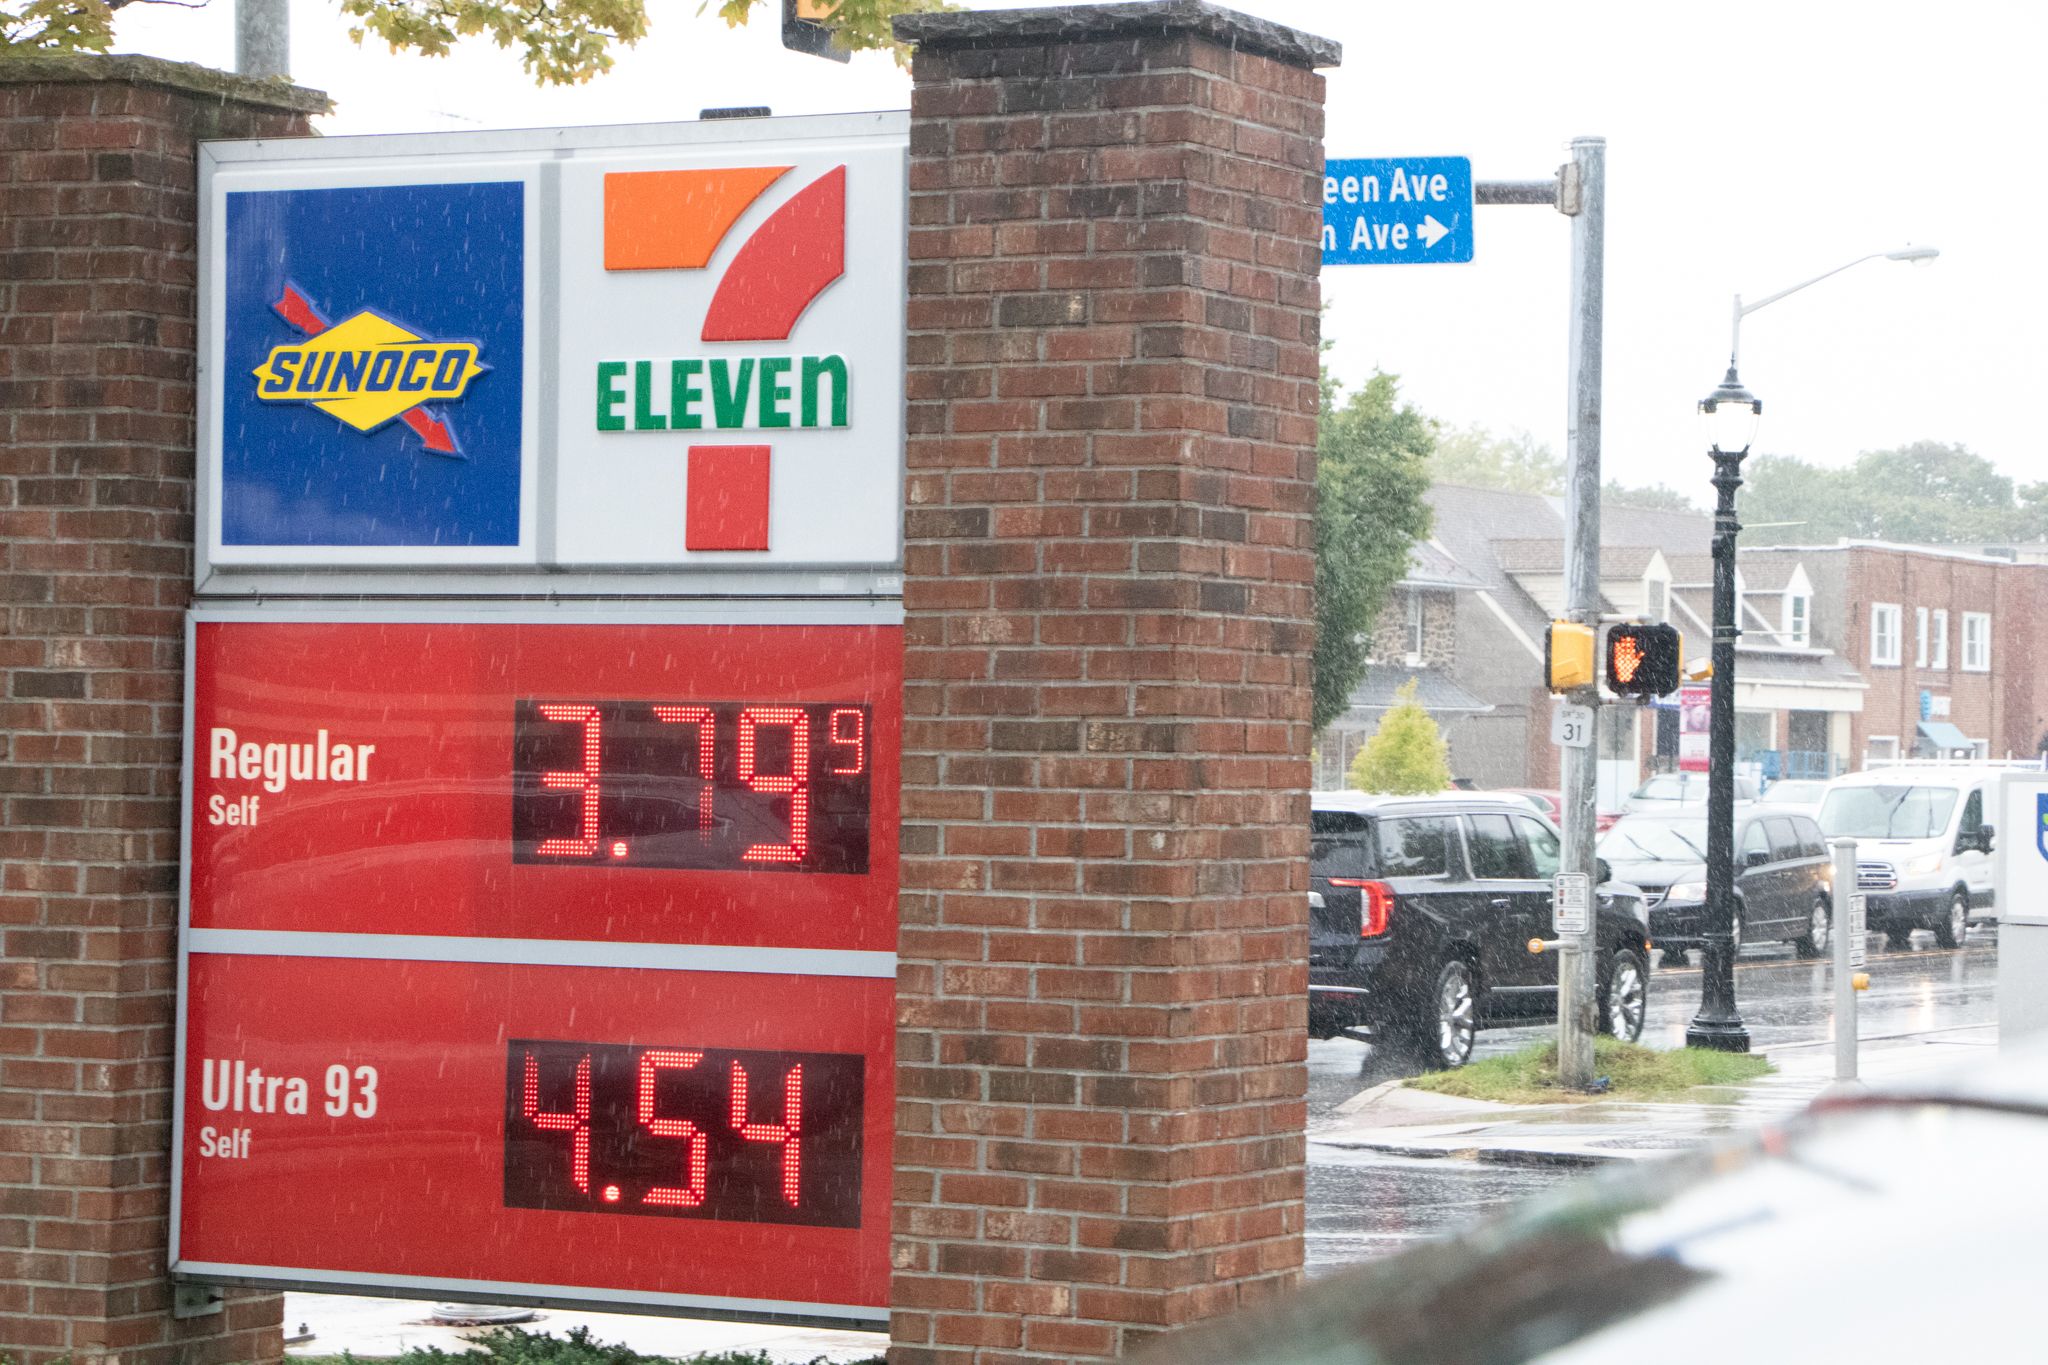 Gas prices at a 7-Eleven in Wayne, PA
Photo by Cecilia Canan